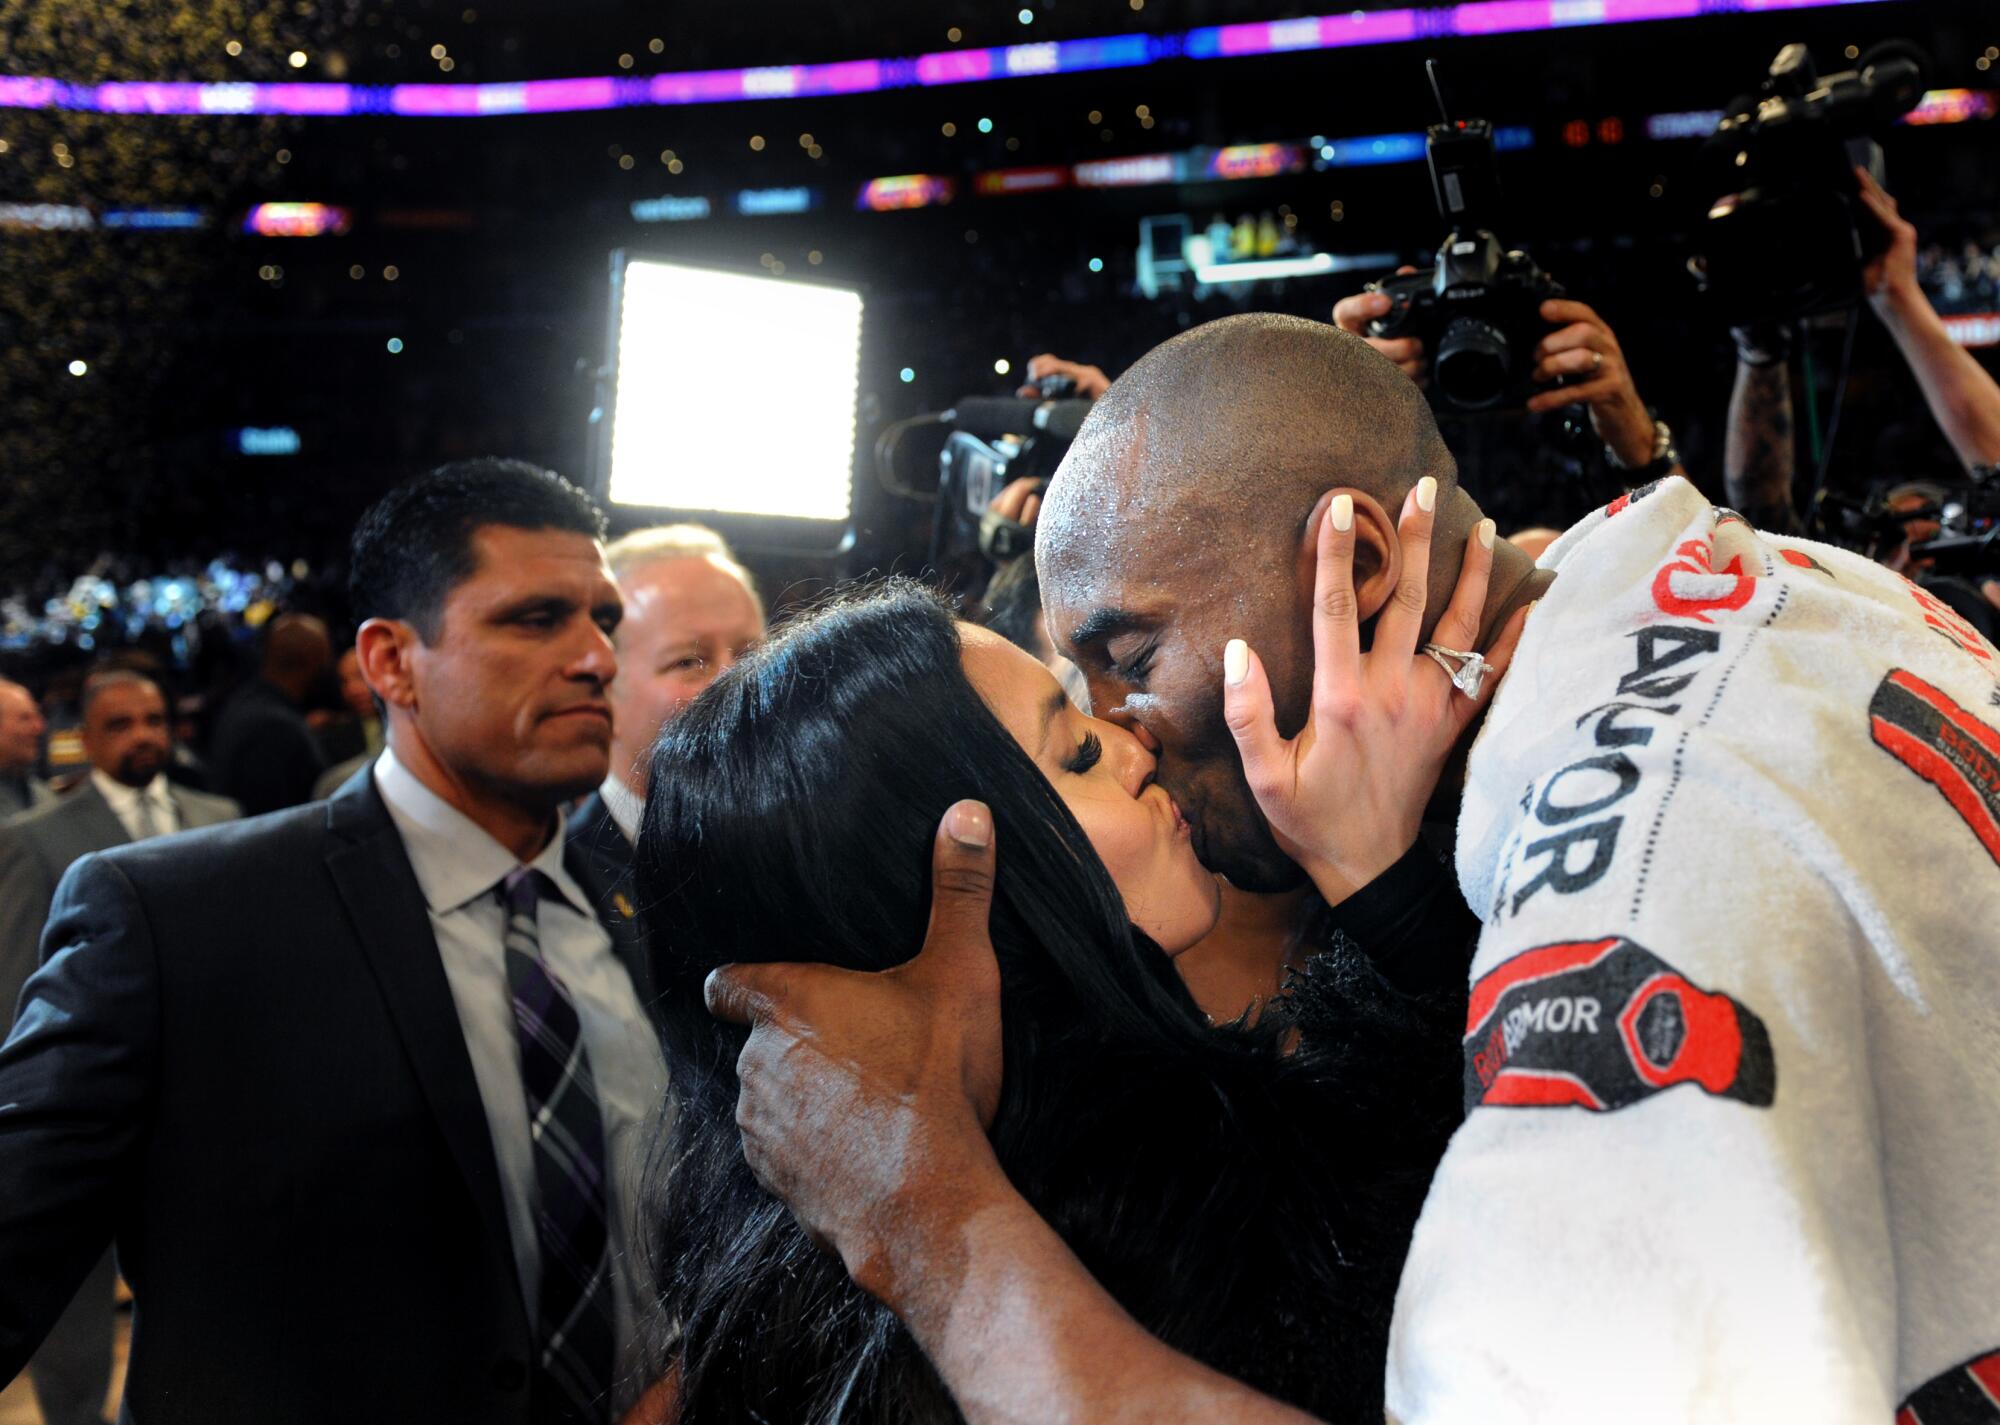 Kobe Bryant kisses his wife Vanessa after the final game of his career.